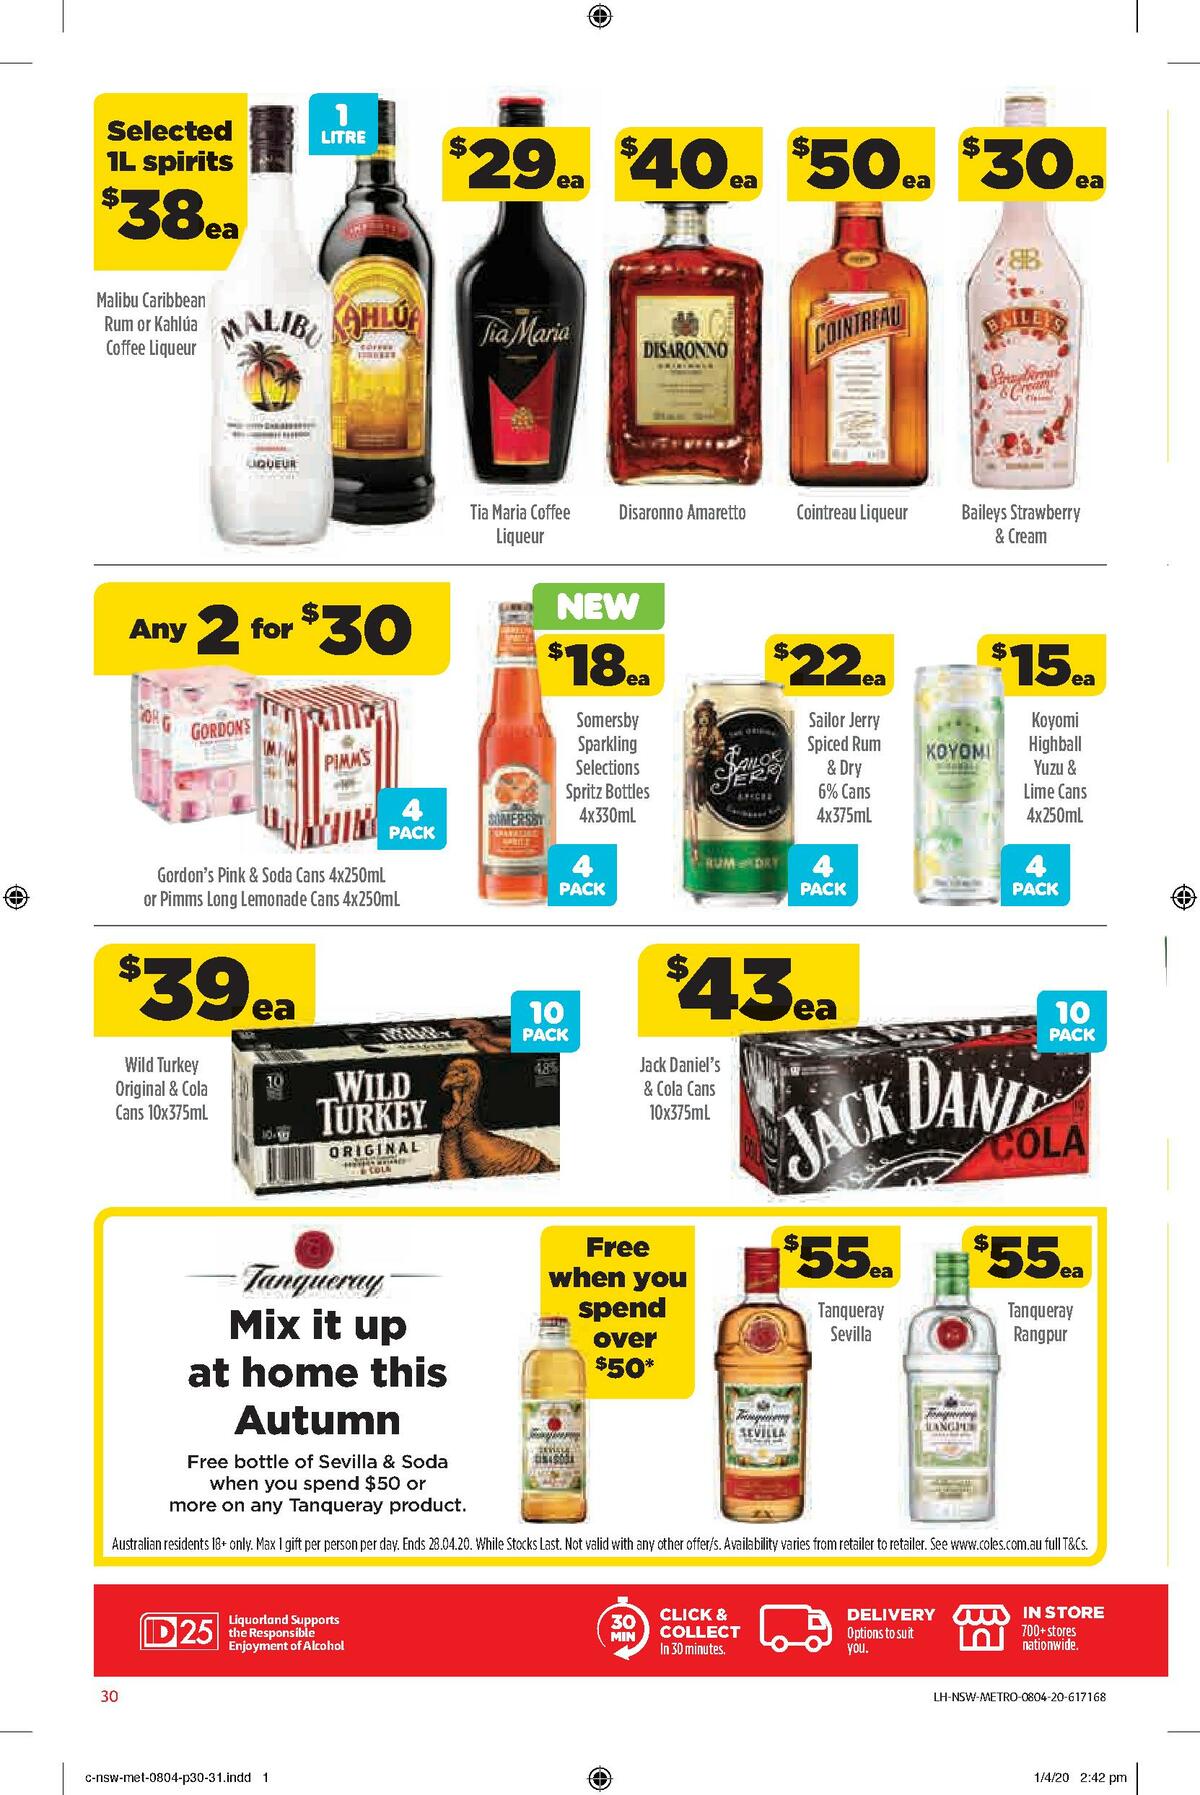 Coles Catalogues from 8 April